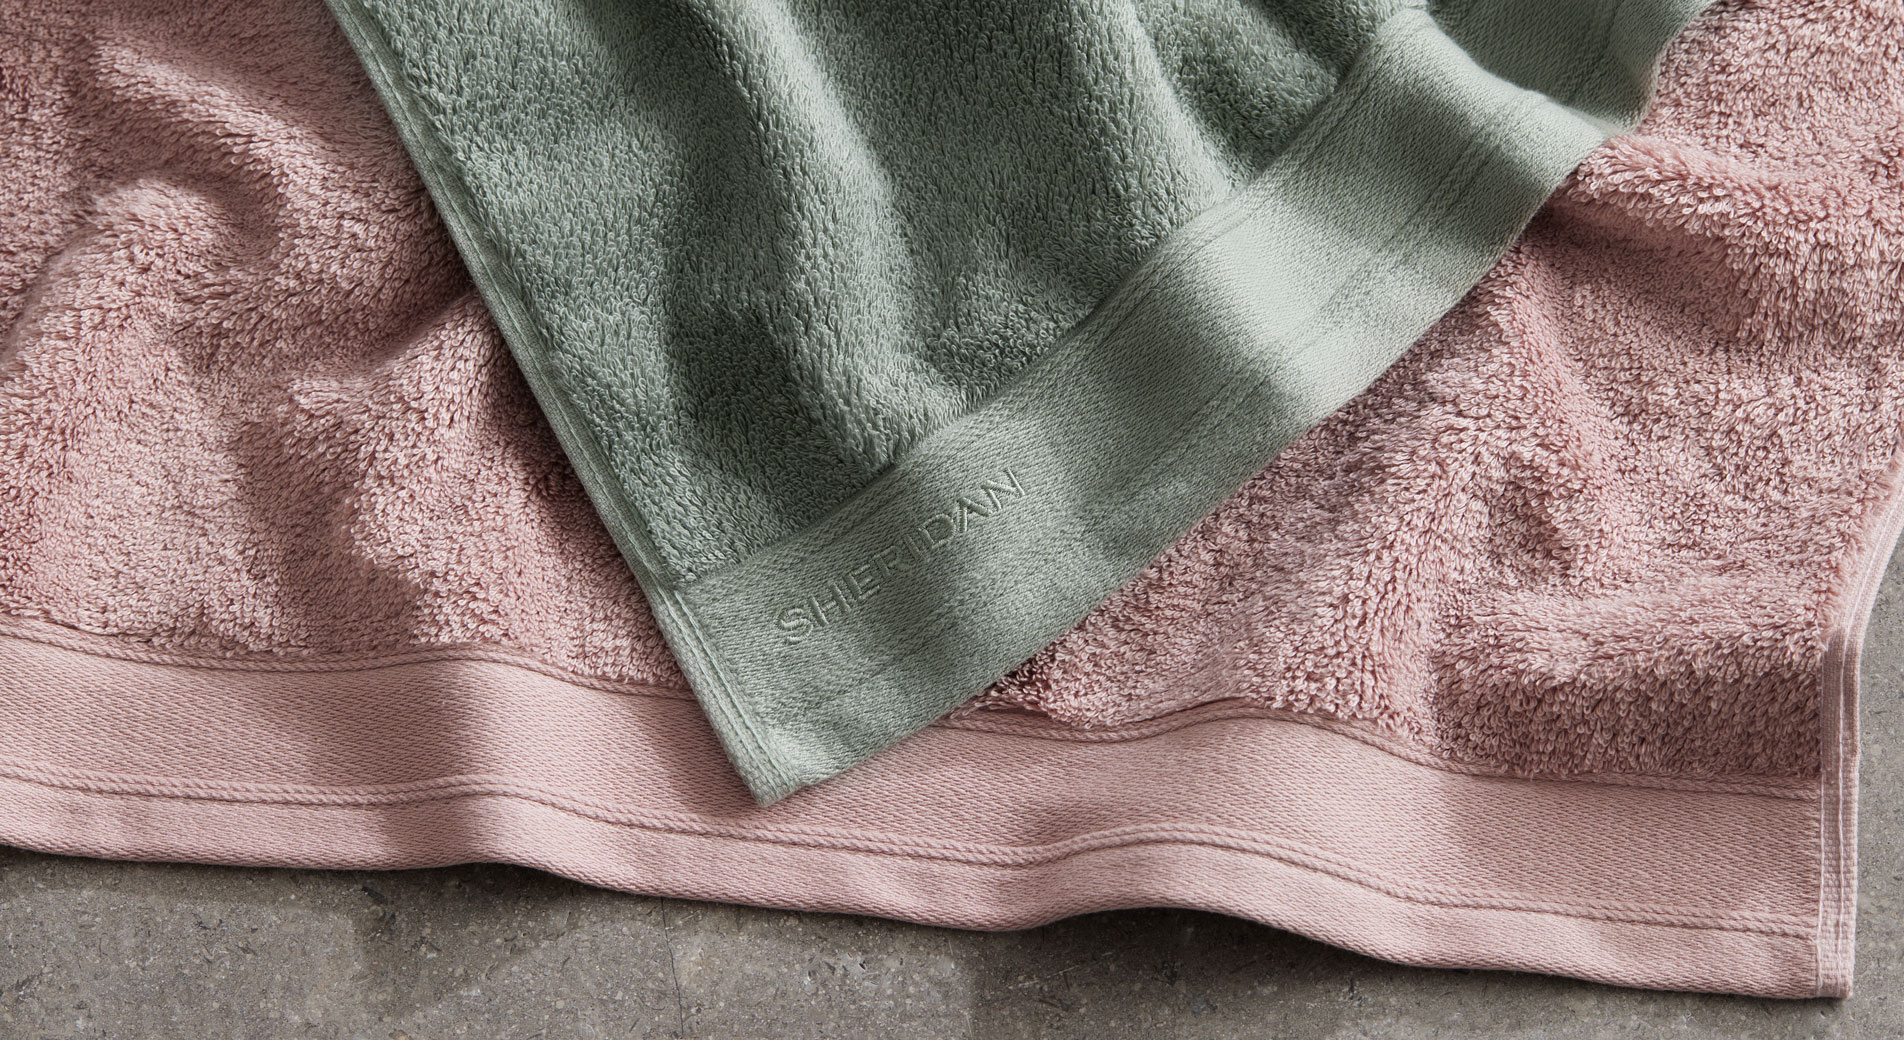 A close-up of two SuperSoft Luxury Towels laying on top of each other